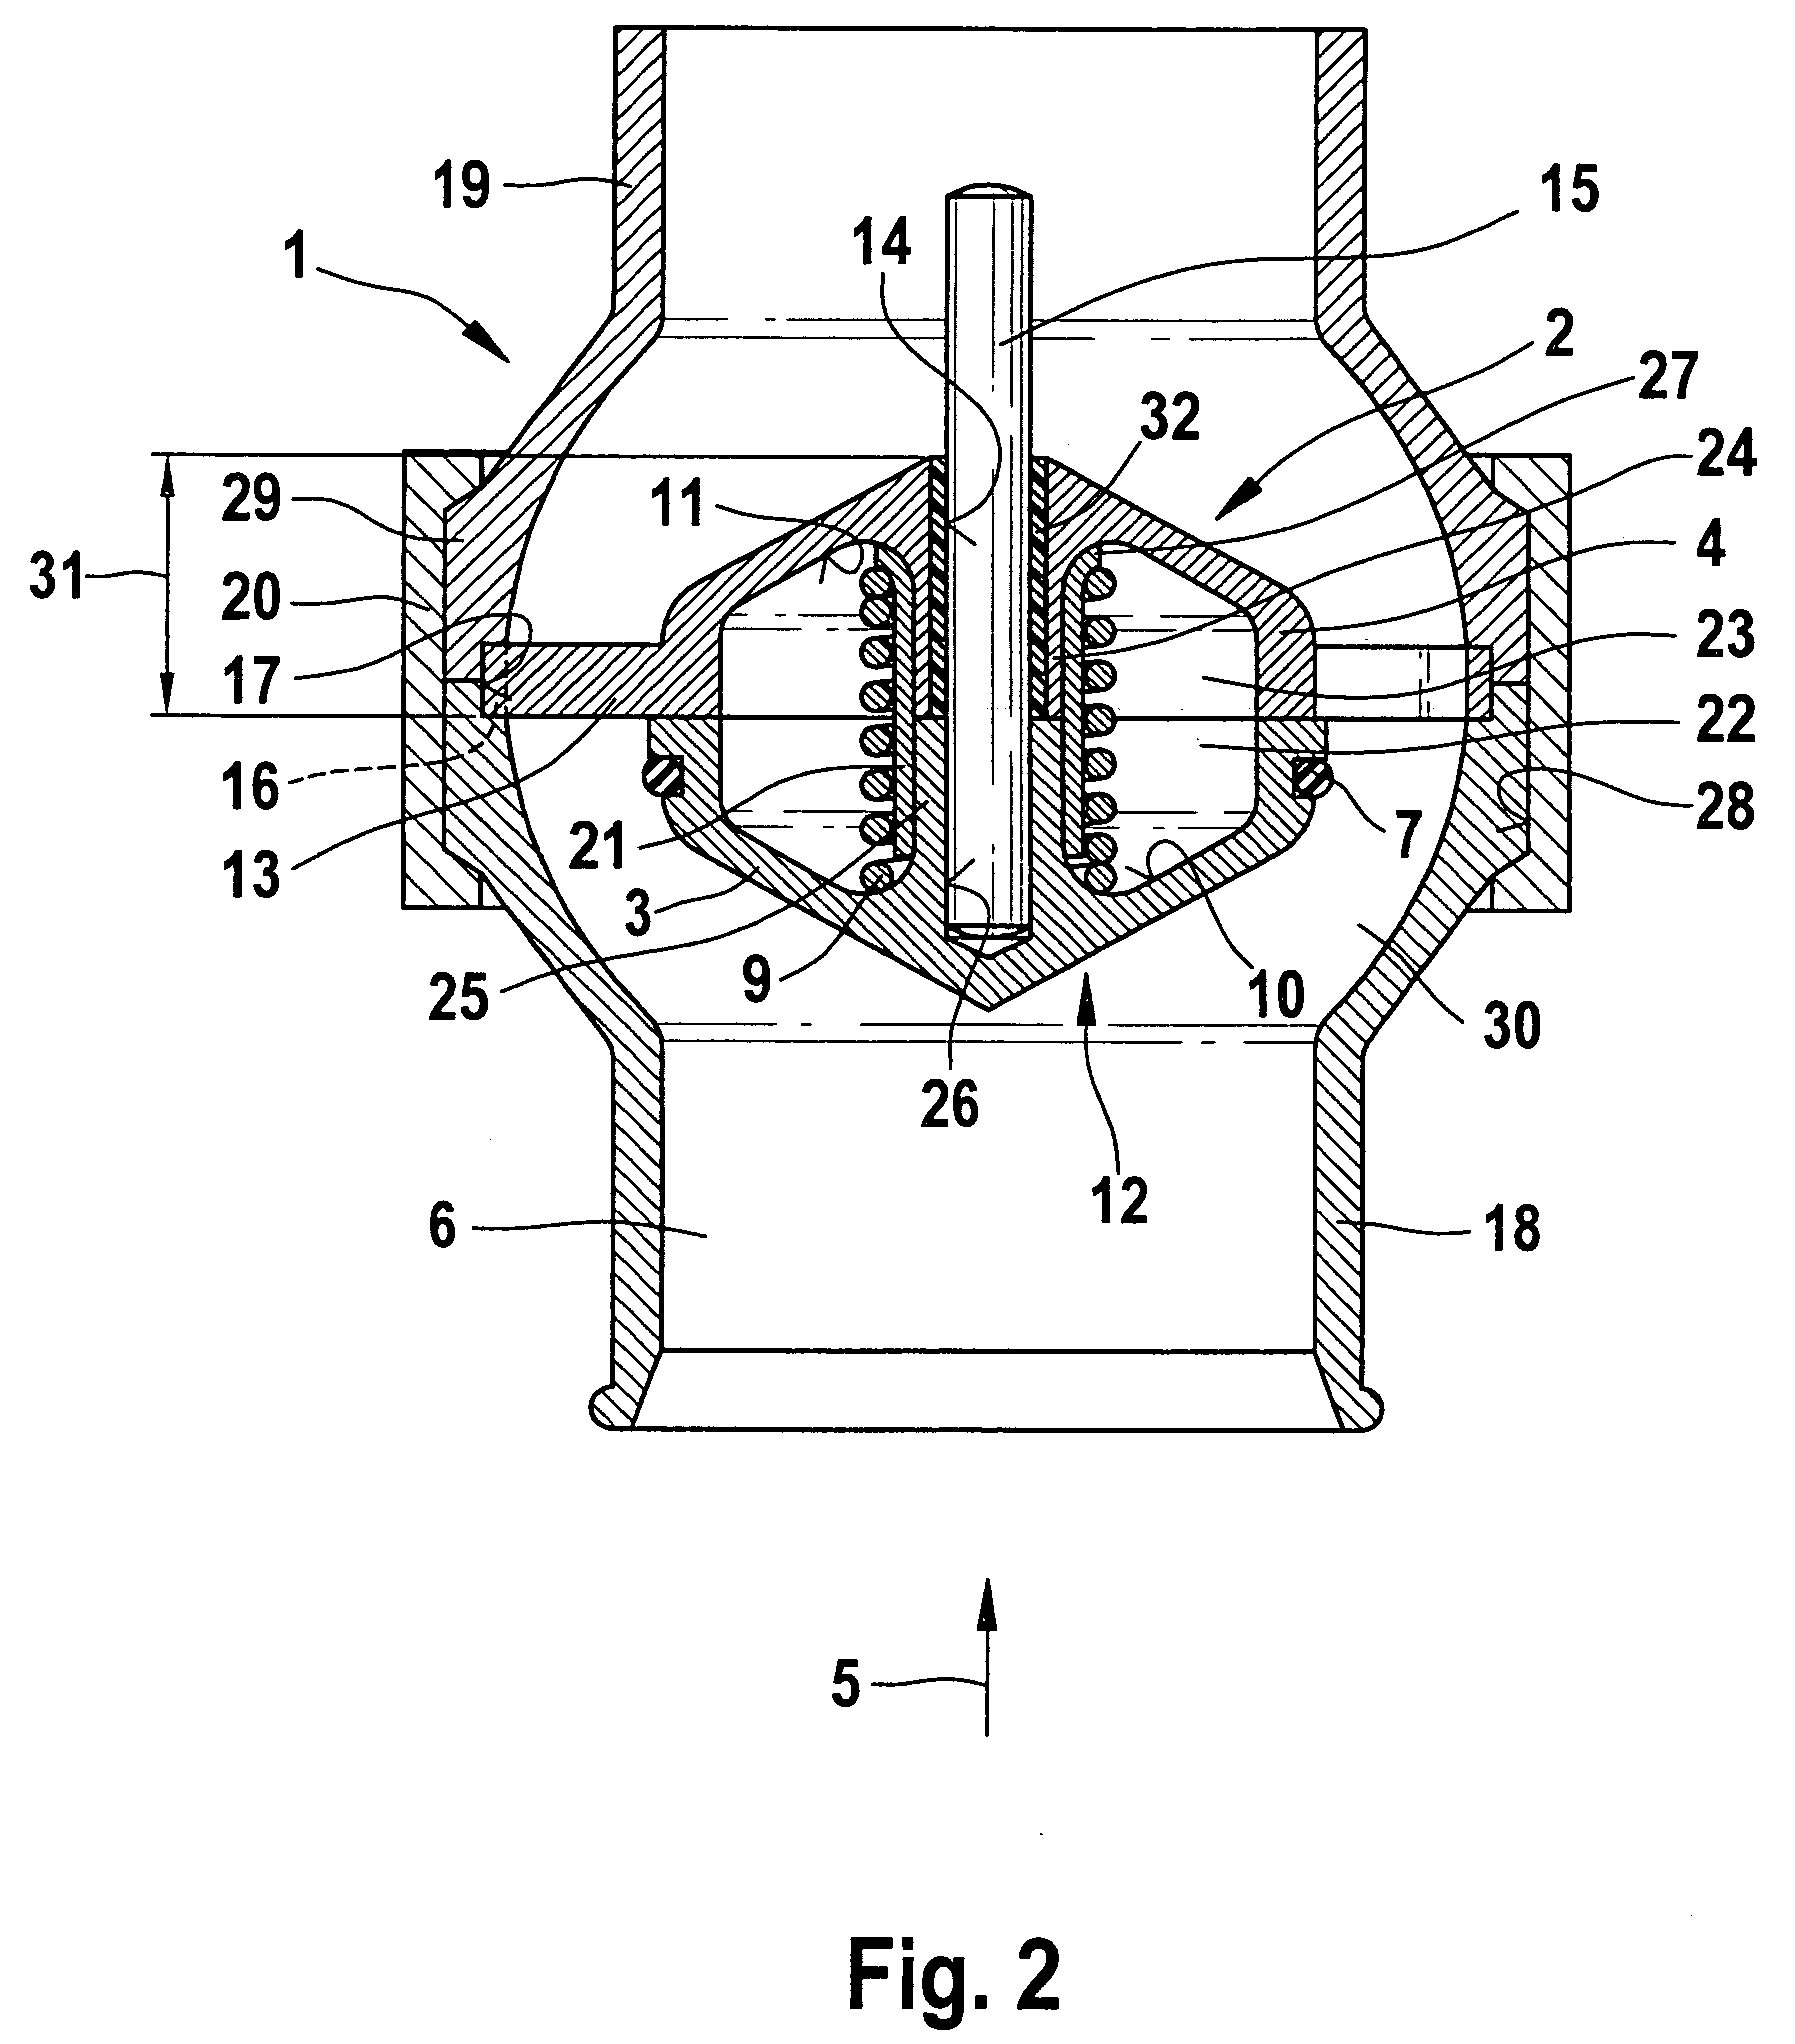 Compressor bypass valve for use in multistage supercharging